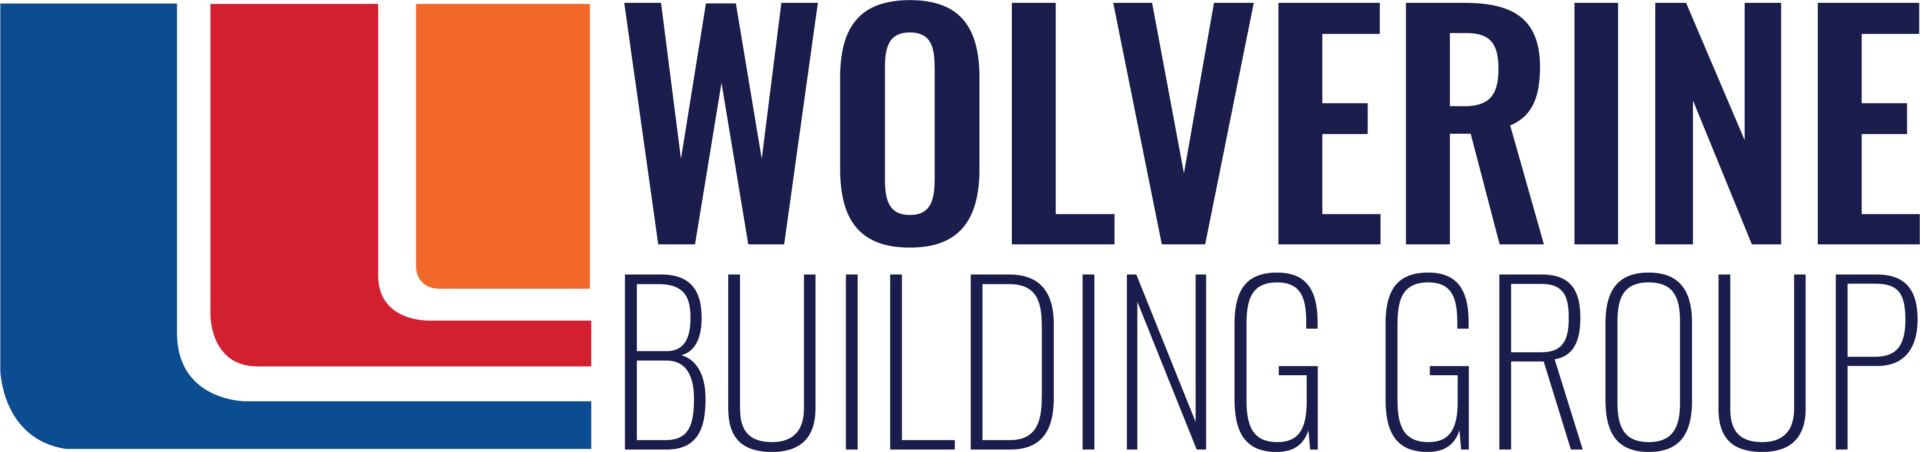 Wolverine Building Group